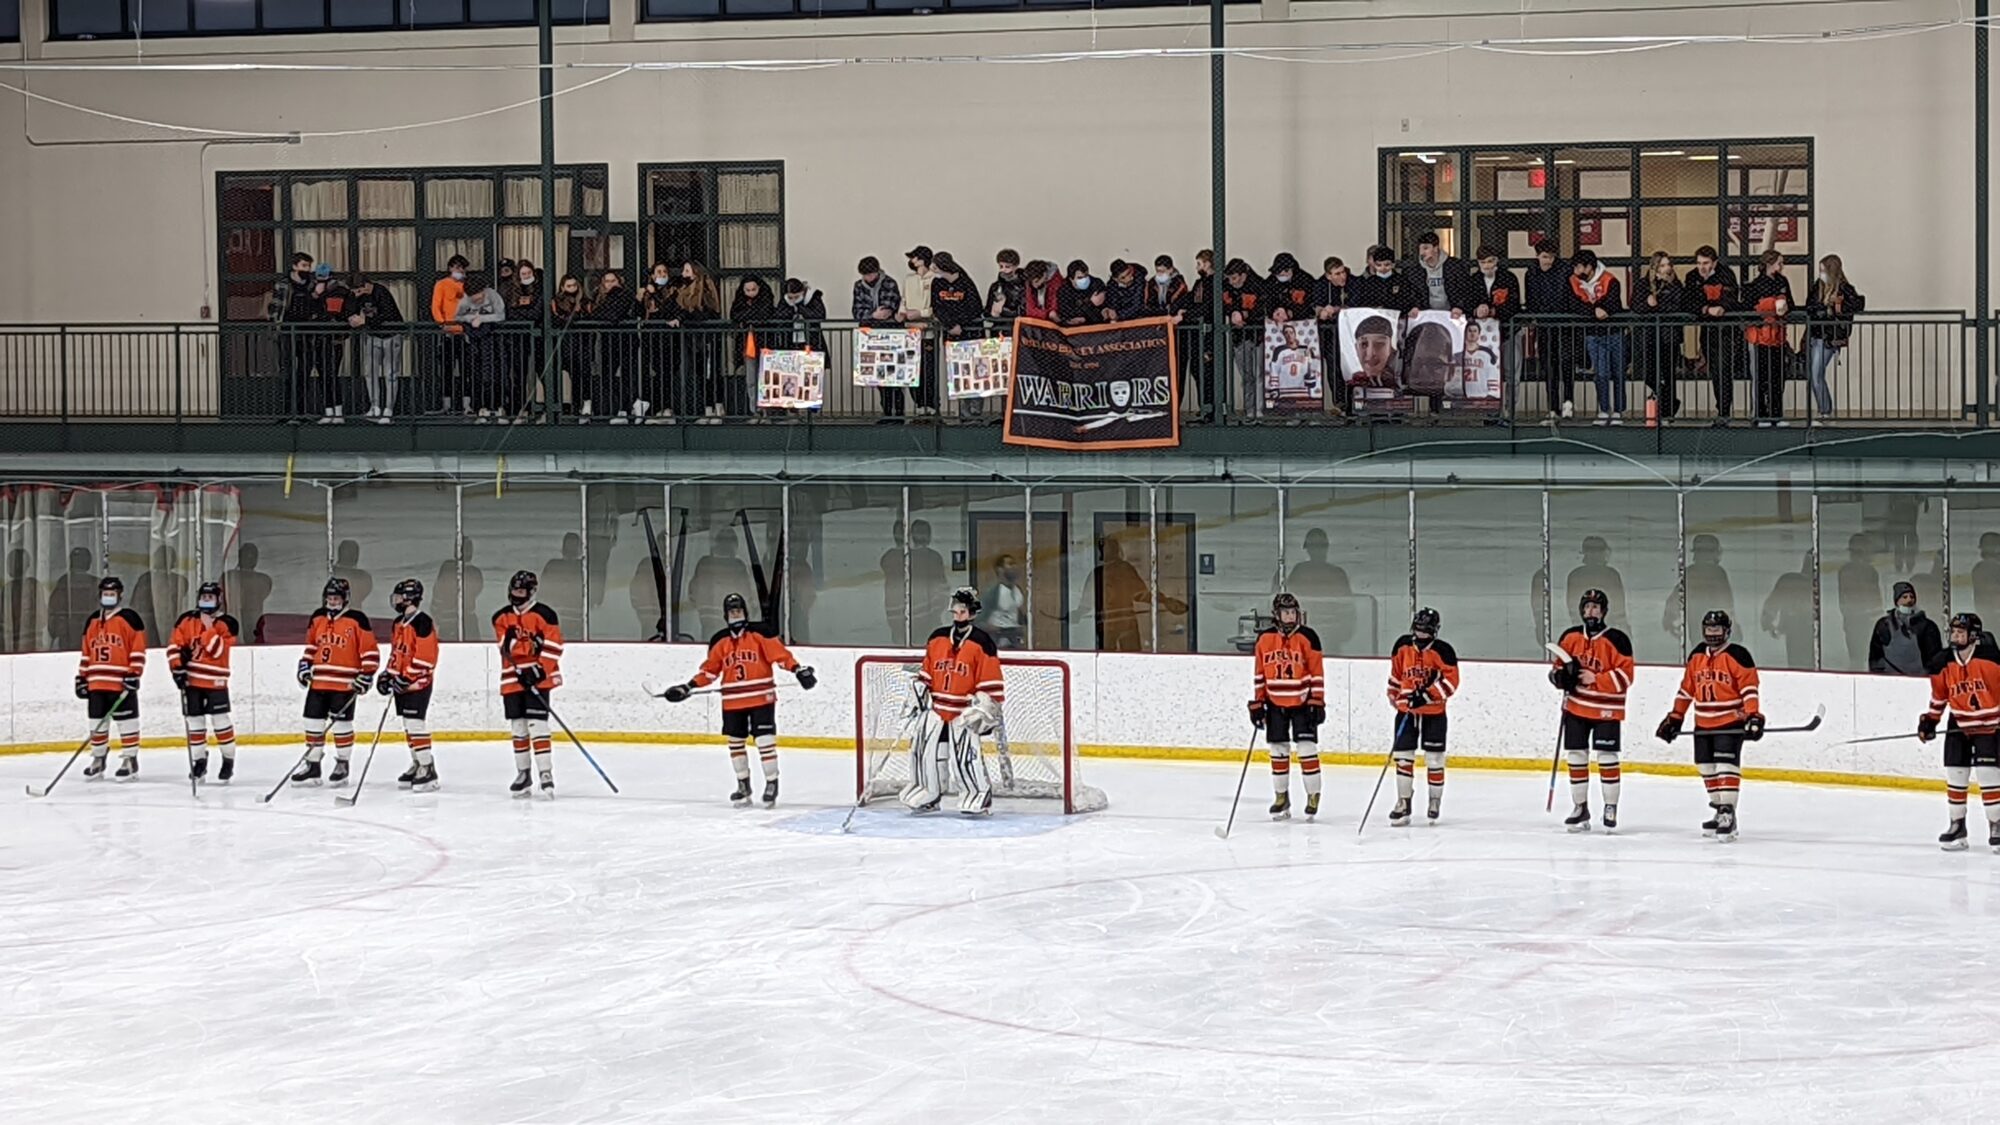 Wayland students cheer on their team at the 2022 Post Road Cup